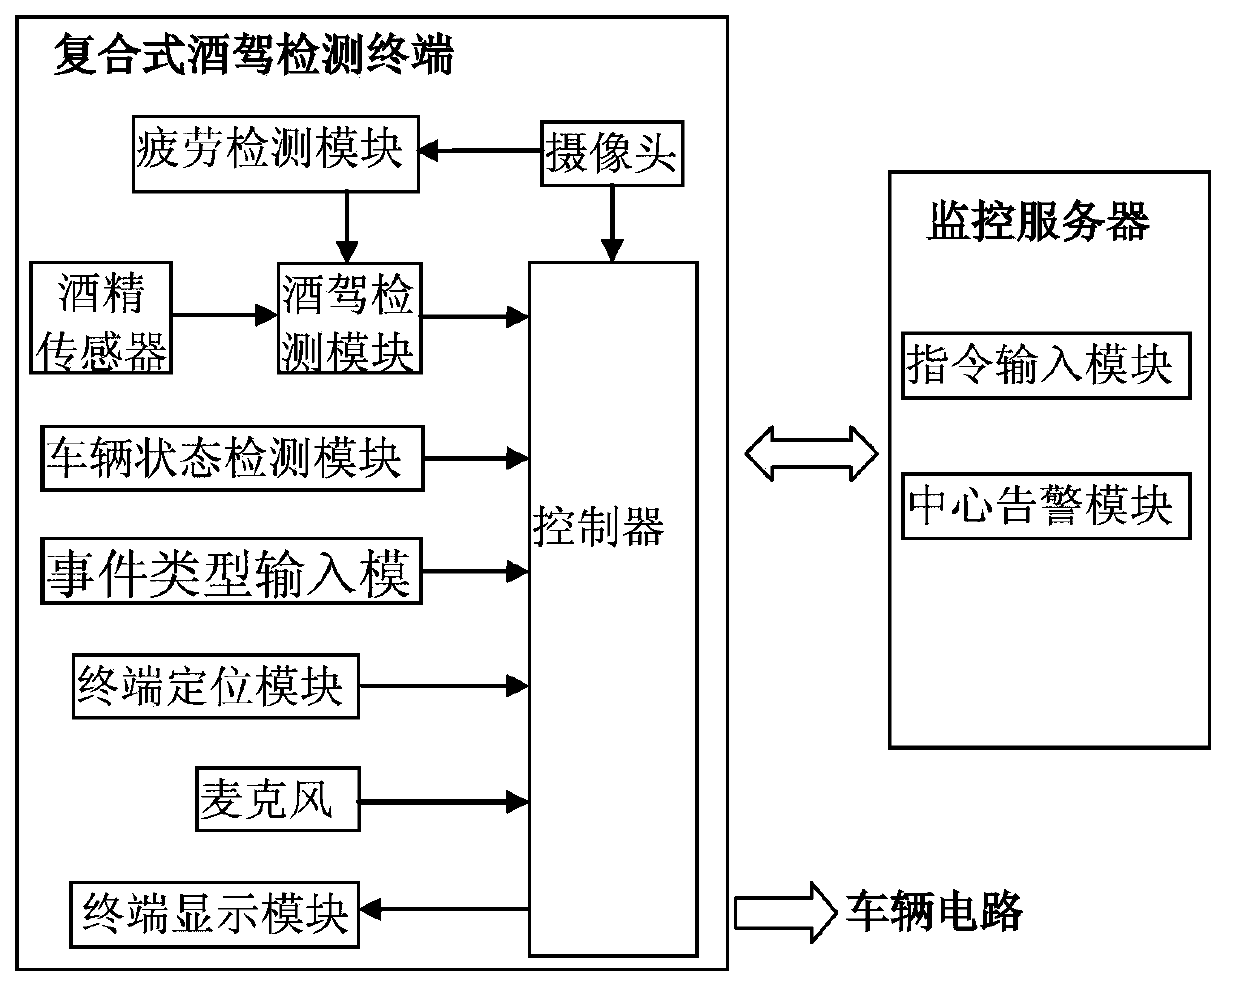 Drunk driving monitoring system, combined drunk driving detection terminal and scheduling server